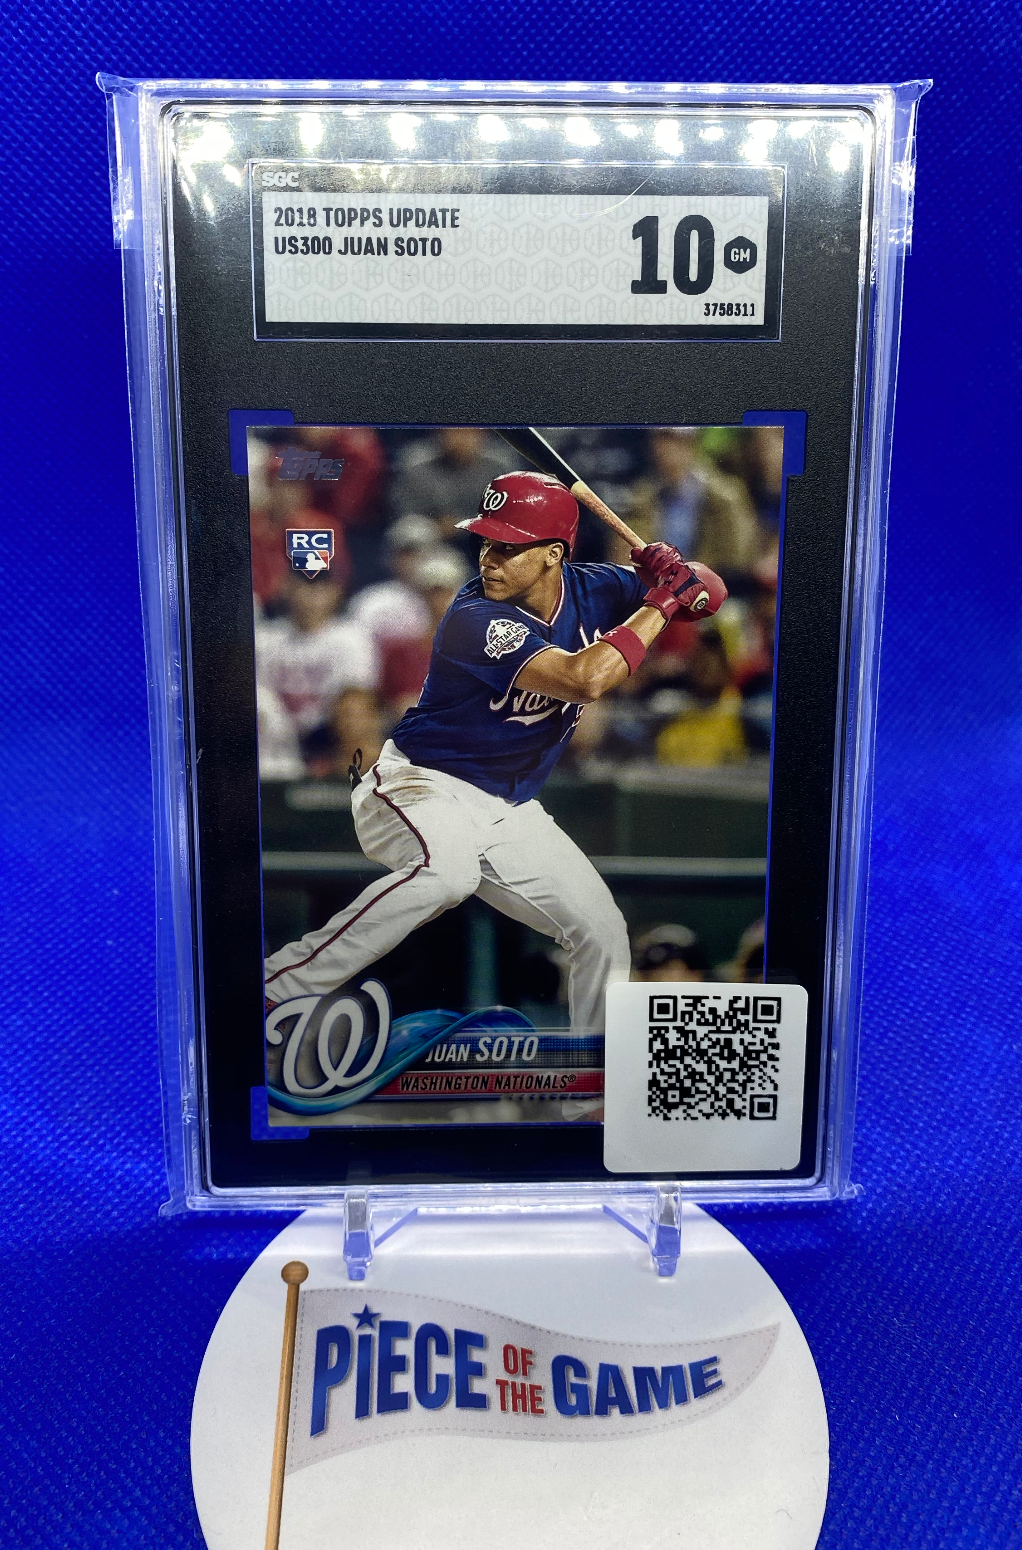 2018 Topps Update Juan Soto SGC 10 – Piece Of The Game